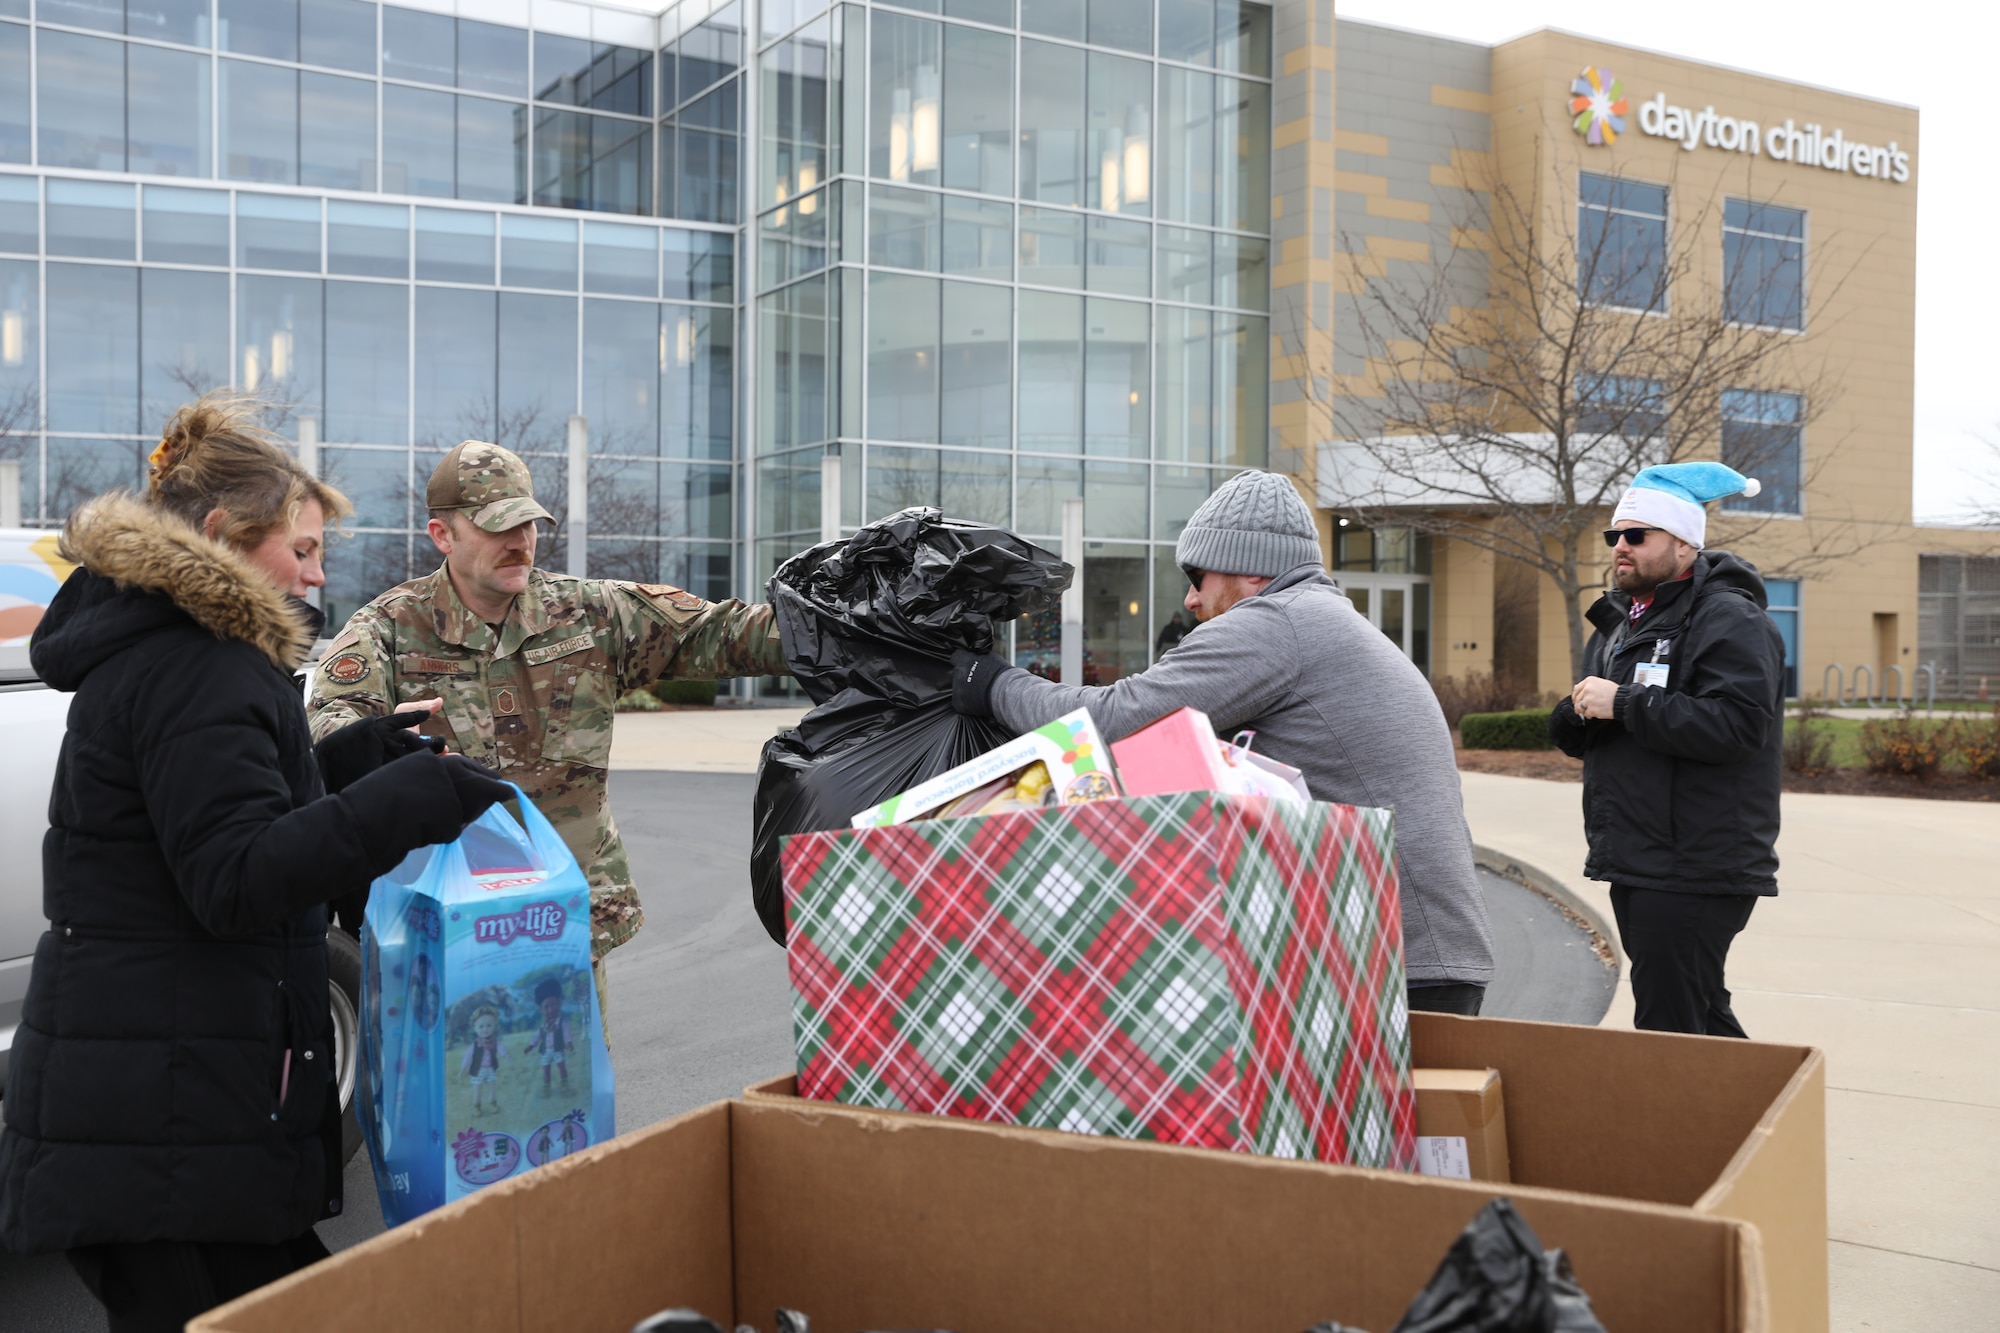 Senior Master Sgt. Brian Anders, 87th Aerial Port Squadron assistant manager, delivers $2,500 of toys and monetary gifts to Dayton Children’s Hospital, Dec. 9, 2022. Airmen with the 87th APS delivered $1,525 in monetary donations and $1,000 in toy donations to the Dayton Children’s Hospital.